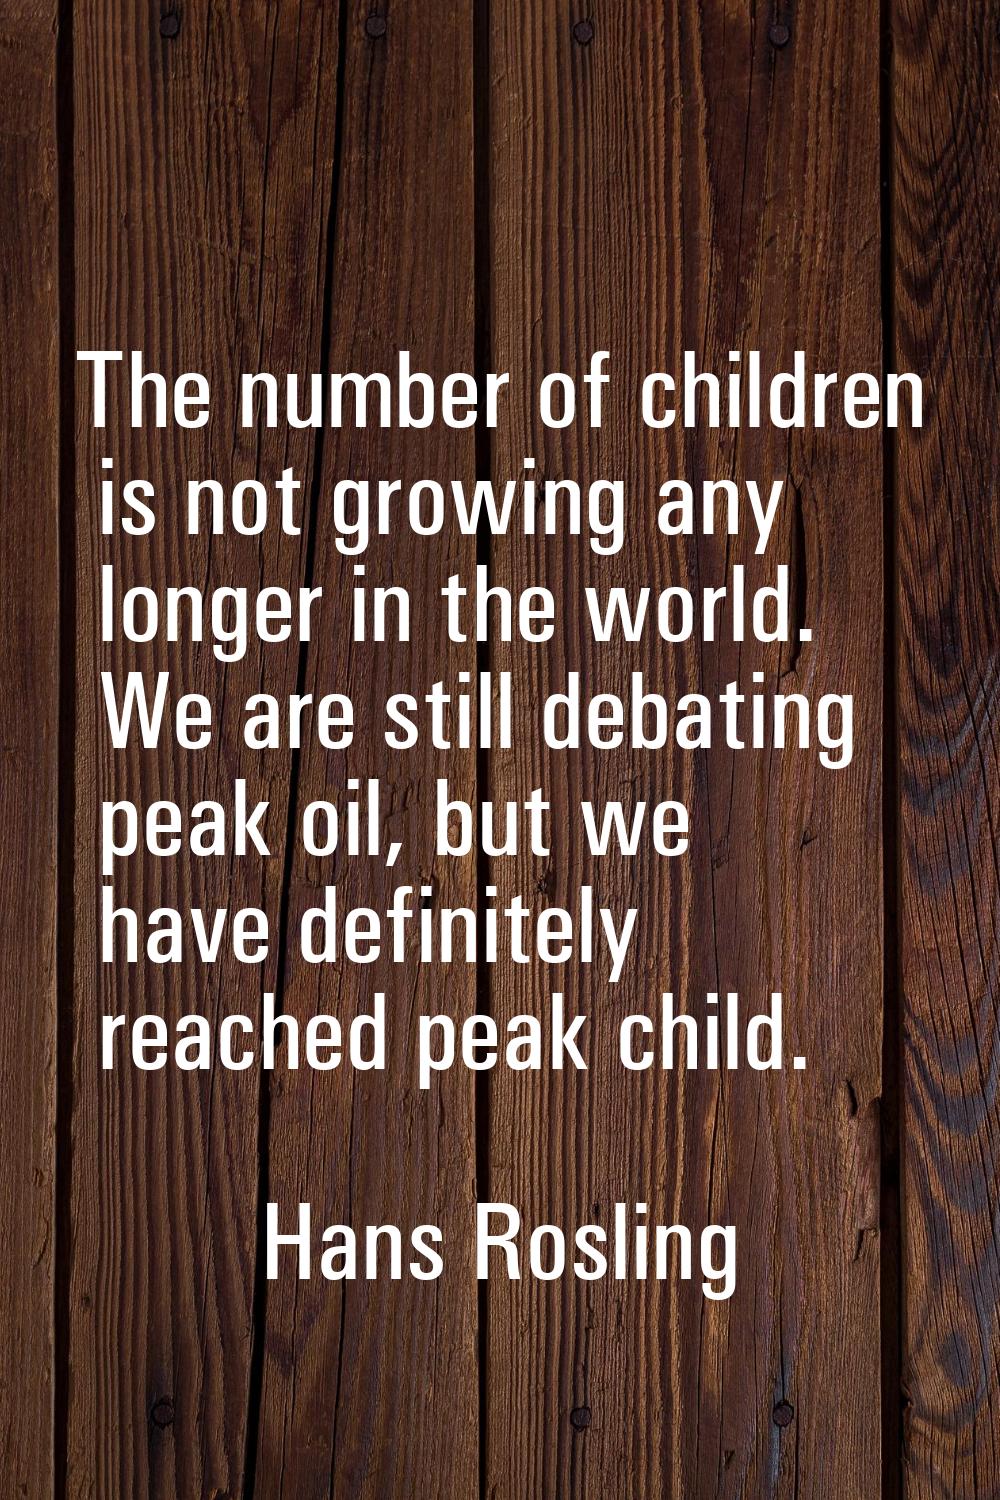 The number of children is not growing any longer in the world. We are still debating peak oil, but 